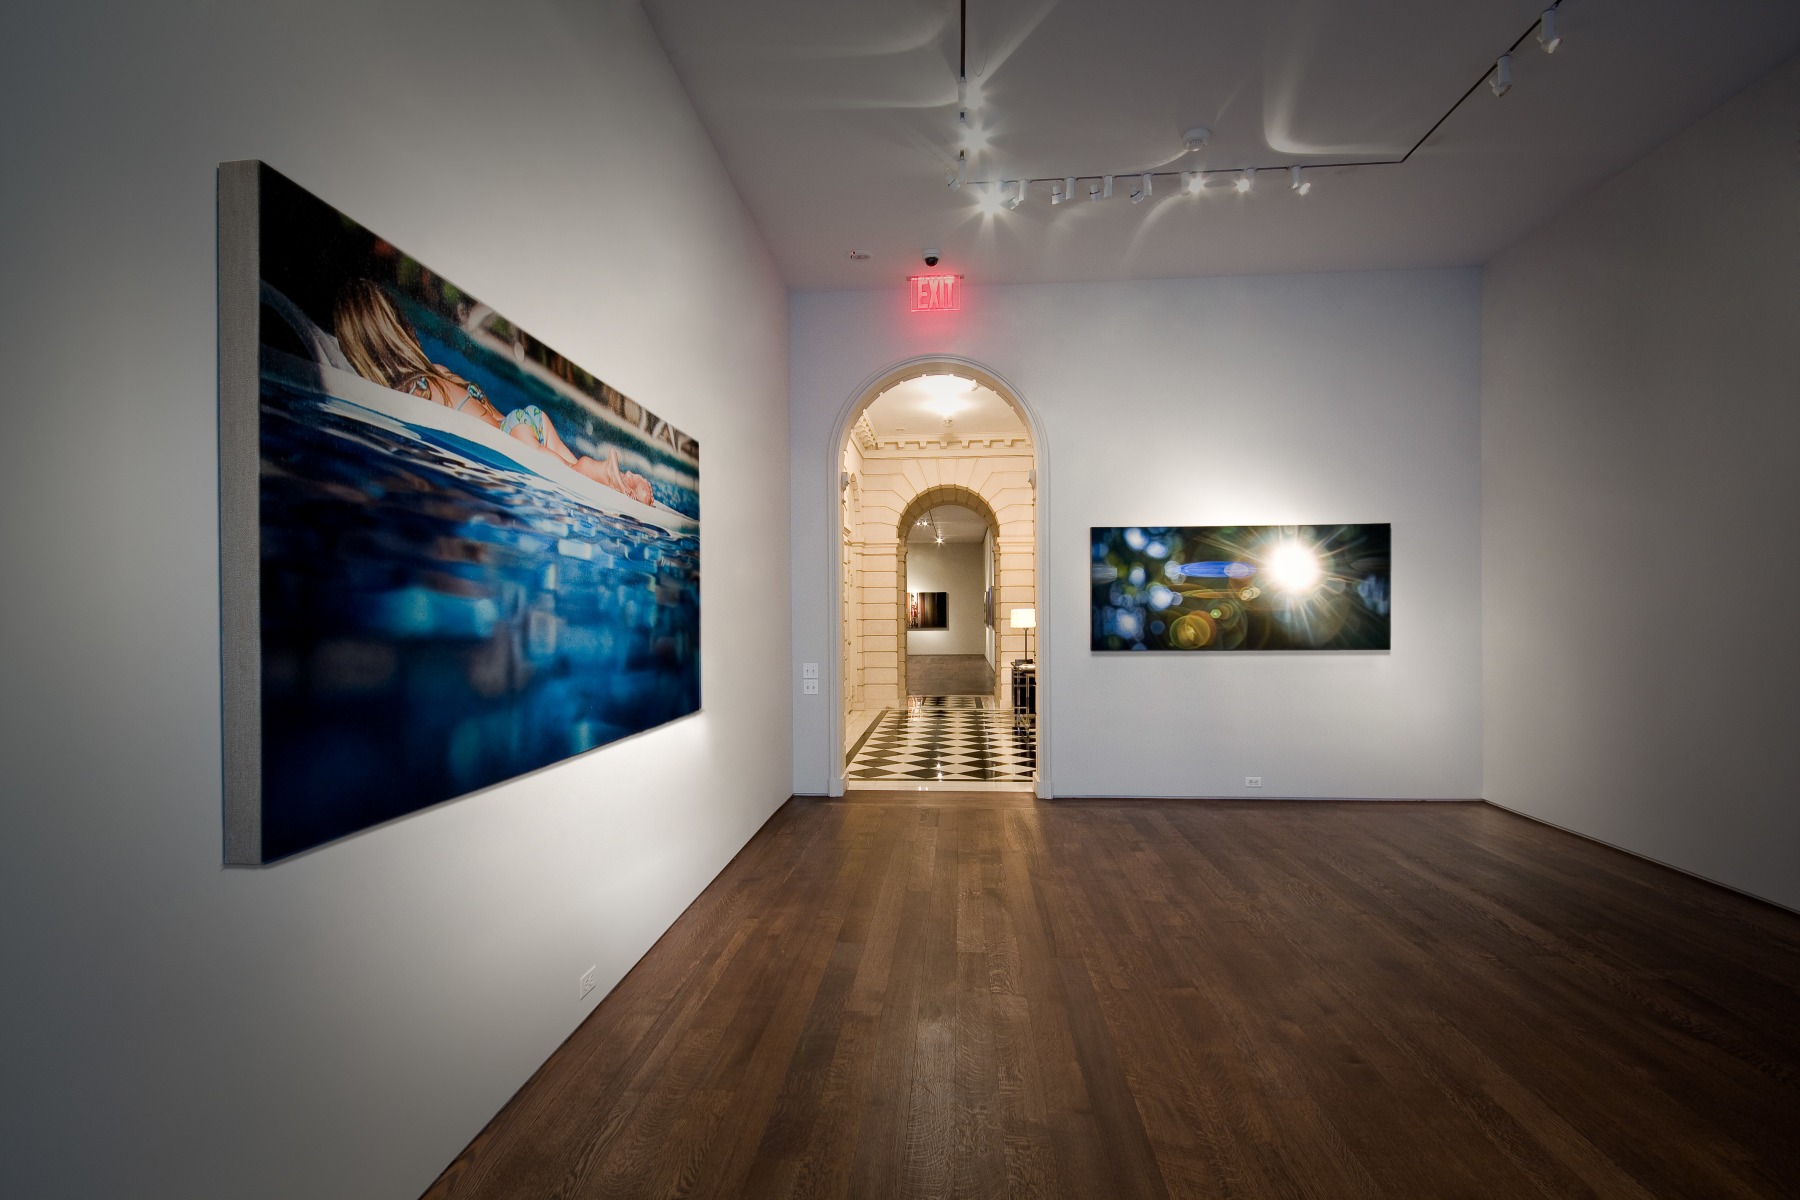 Installation view of Synesthesia, Parataxic Distortion, and the Shadow: A Show of Paintings by Damian Loeb at Acquavella Galleries from September 5 - October 4, 2008.